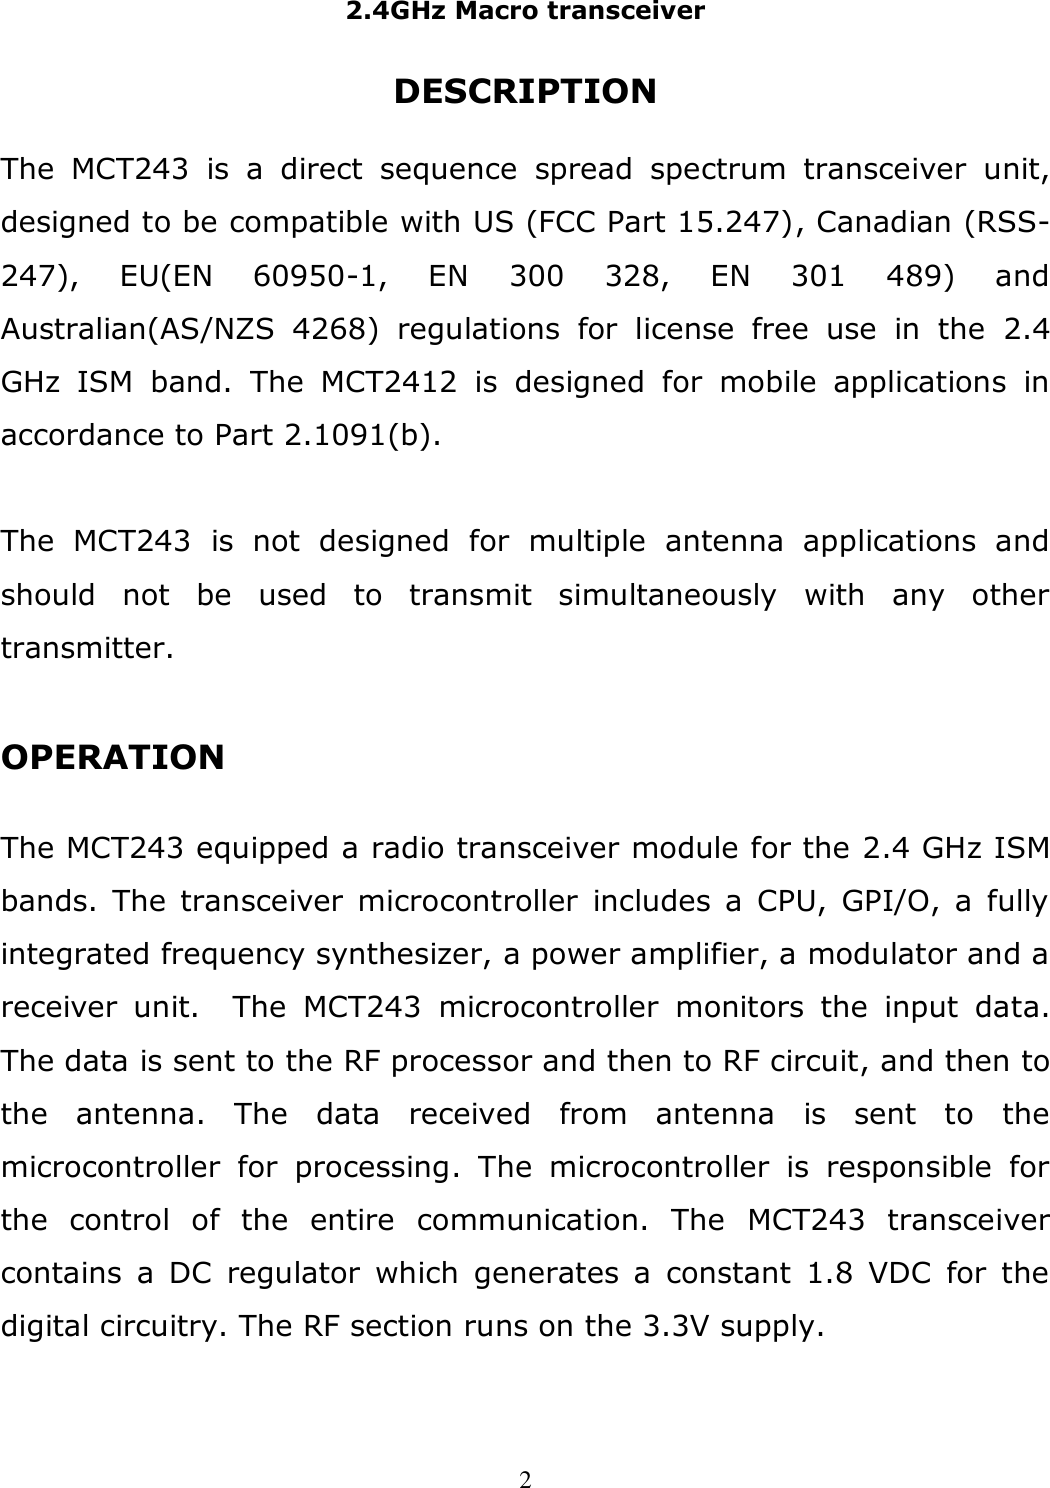 2.4GHz Macro transceiver   2 DESCRIPTION  The  MCT243  is  a  direct  sequence  spread  spectrum  transceiver  unit, designed to be compatible with US (FCC Part 15.247), Canadian (RSS-247),  EU(EN  60950-1,  EN  300  328,  EN  301  489)  and Australian(AS/NZS  4268)  regulations  for  license  free  use  in  the  2.4 GHz  ISM  band.  The  MCT2412  is  designed  for  mobile  applications  in accordance to Part 2.1091(b).  The  MCT243  is  not  designed  for  multiple  antenna  applications  and should  not  be  used  to  transmit  simultaneously  with  any  other transmitter.  OPERATION  The MCT243 equipped a radio transceiver module for the 2.4 GHz ISM bands. The transceiver microcontroller  includes a CPU, GPI/O, a fully integrated frequency synthesizer, a power amplifier, a modulator and a receiver  unit.    The  MCT243  microcontroller  monitors  the  input  data.  The data is sent to the RF processor and then to RF circuit, and then to the  antenna.  The  data  received  from  antenna  is  sent  to  the microcontroller  for  processing.  The  microcontroller  is  responsible  for the  control  of  the  entire  communication.  The  MCT243  transceiver contains a  DC  regulator  which  generates  a  constant  1.8 VDC  for the digital circuitry. The RF section runs on the 3.3V supply.  